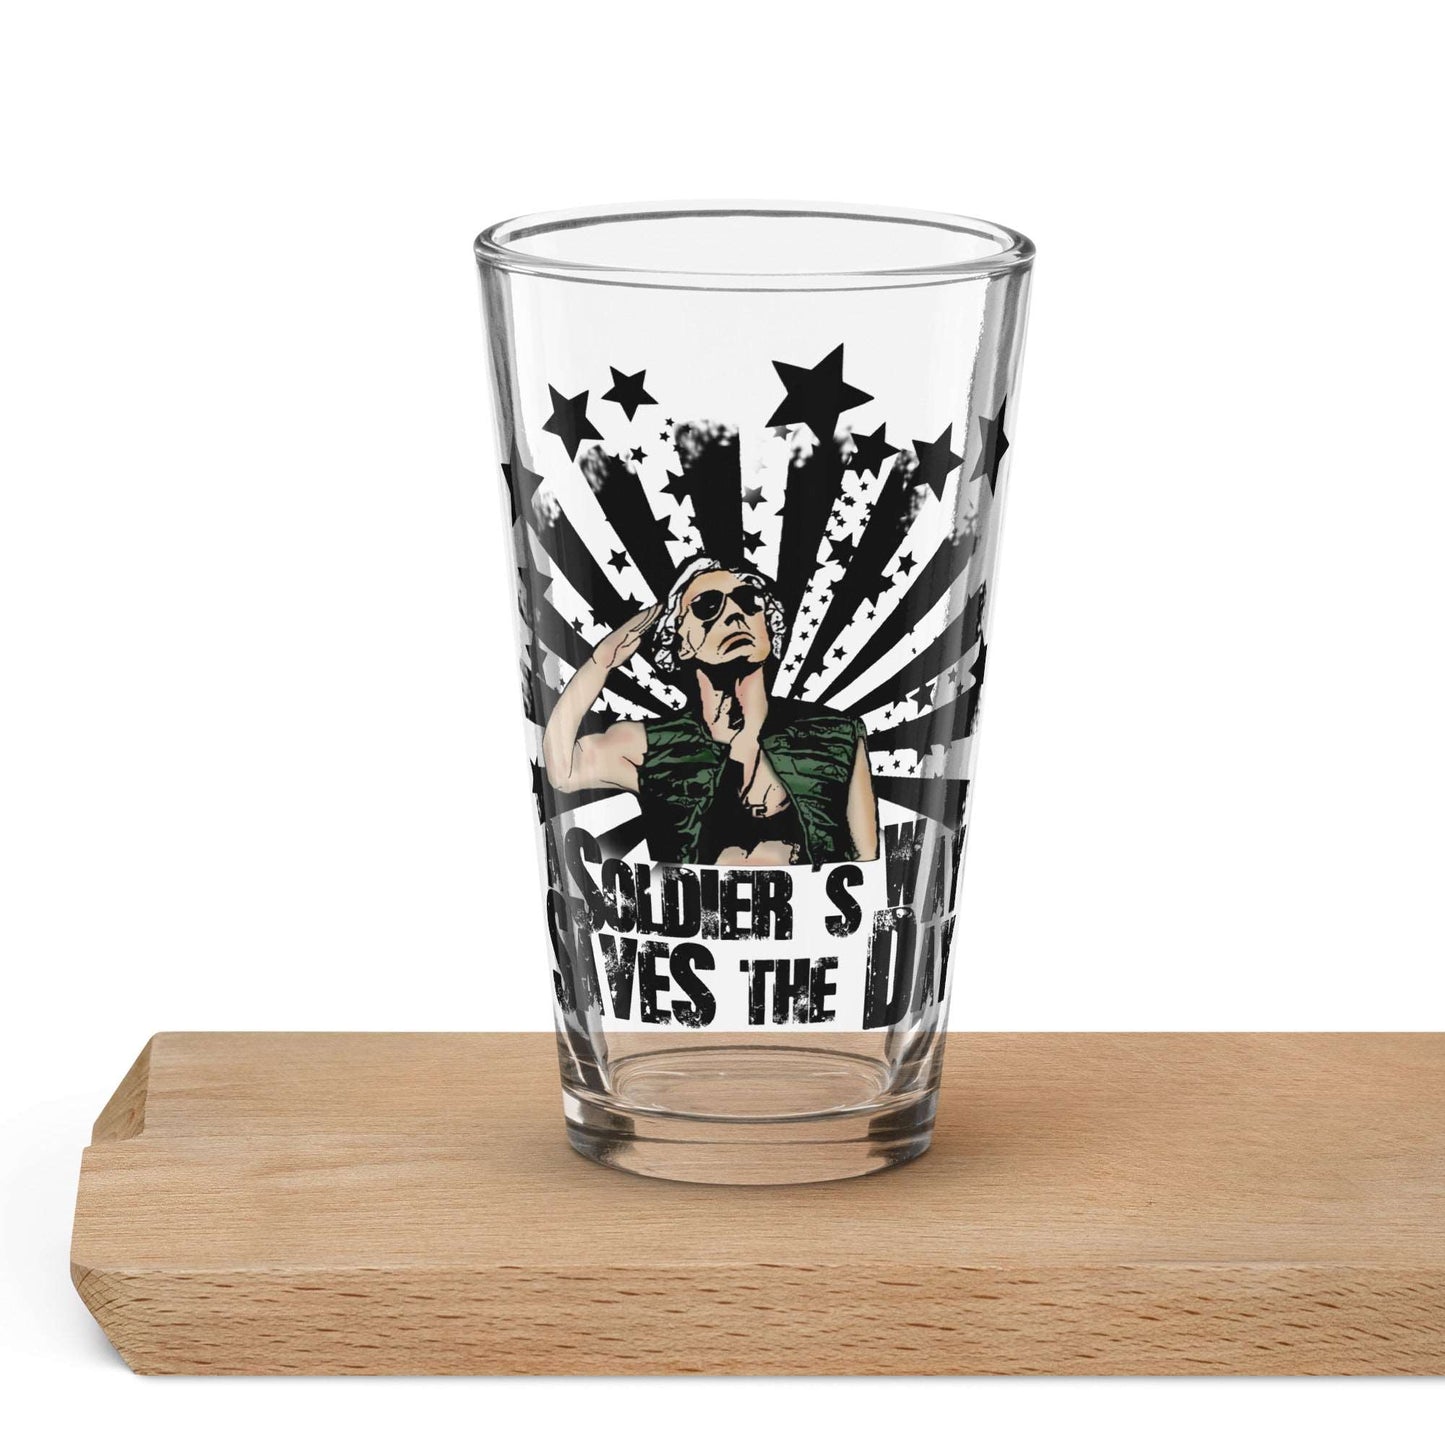 The Burbs Soldier's Way Pint Glass